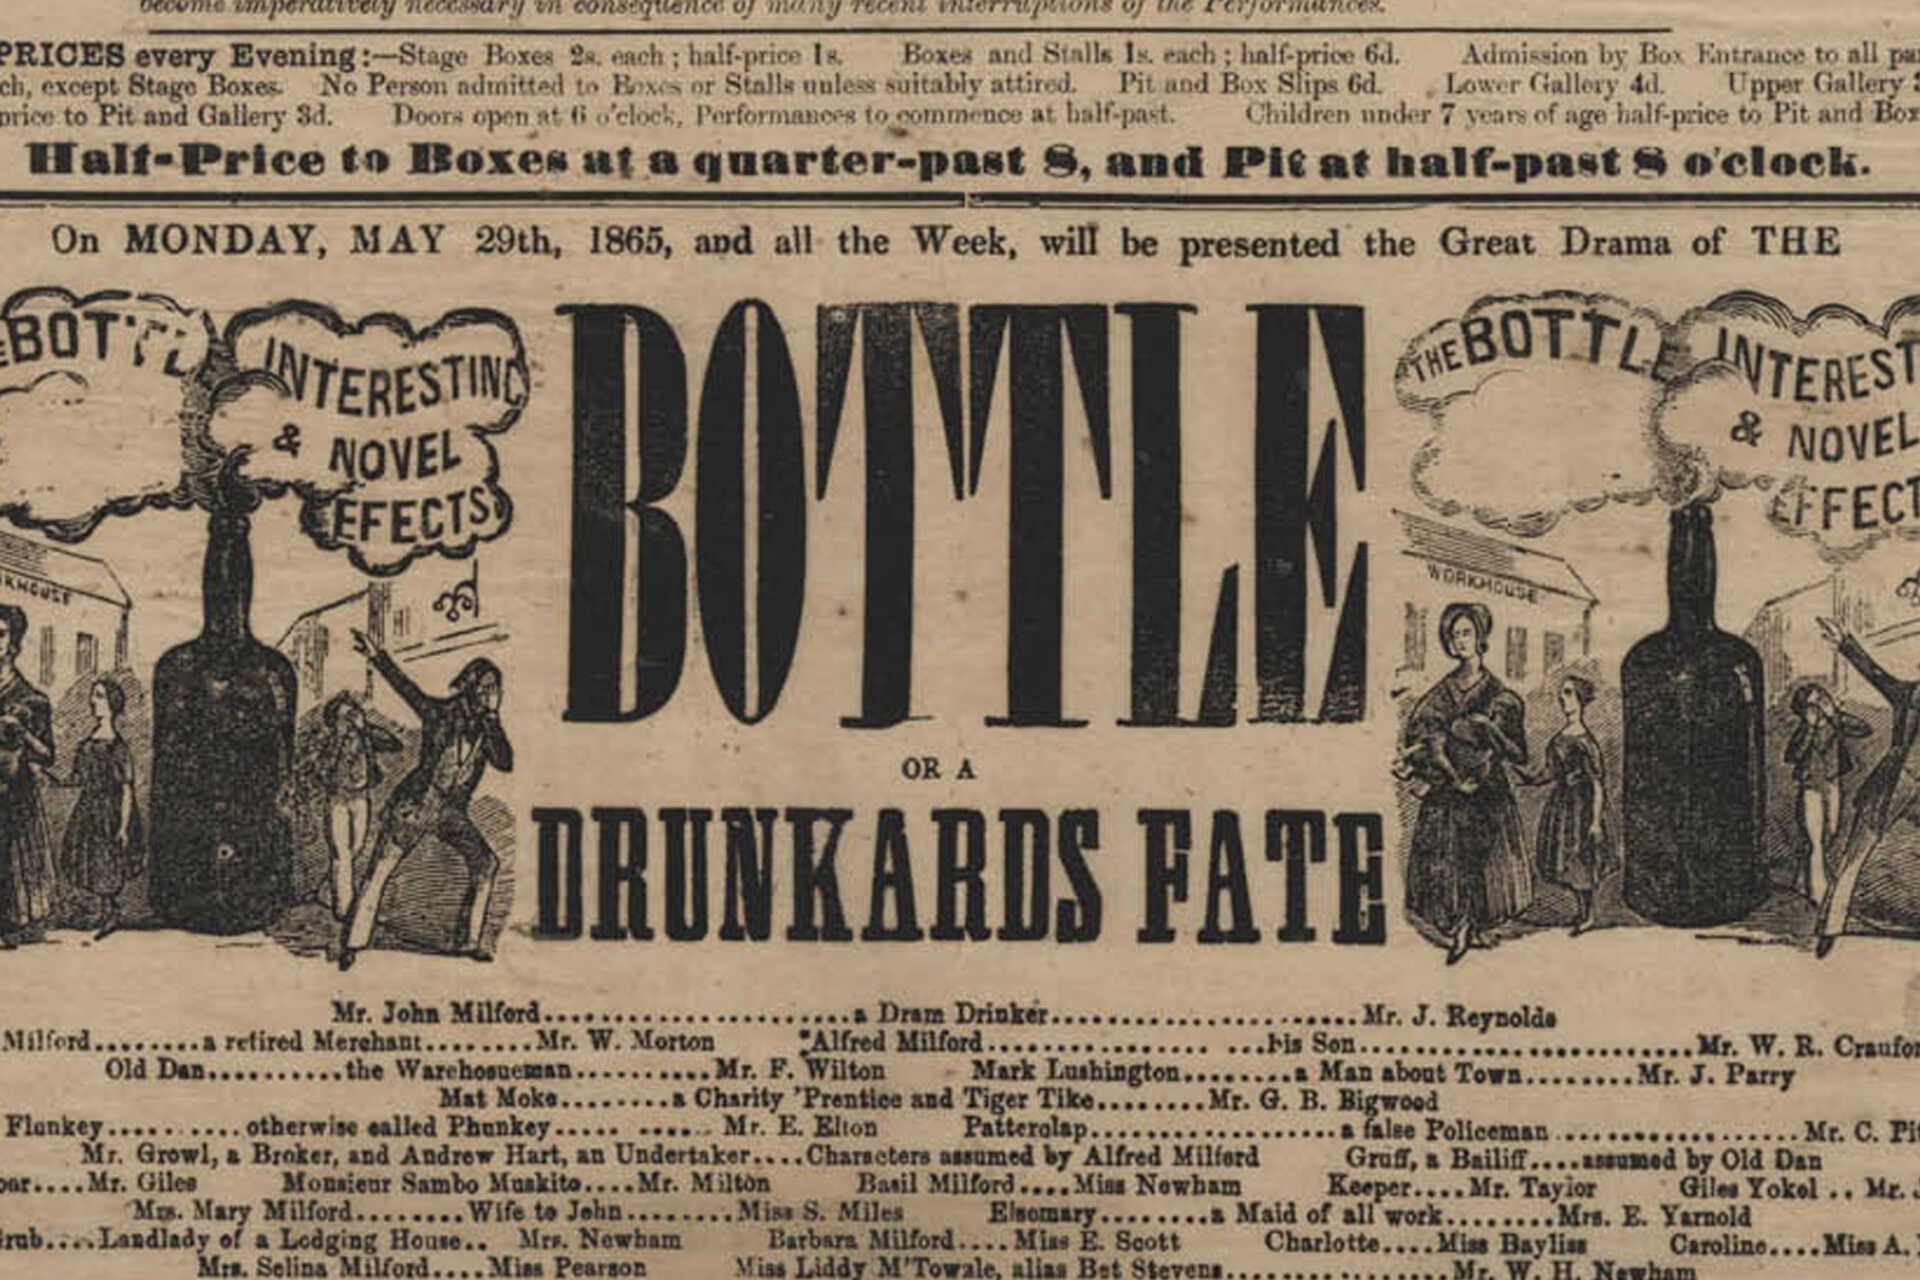 Playbill advertising Bottle, Beauty and The Beast and Charlotte Corday at The Britannia Theatre 29th May 1865.